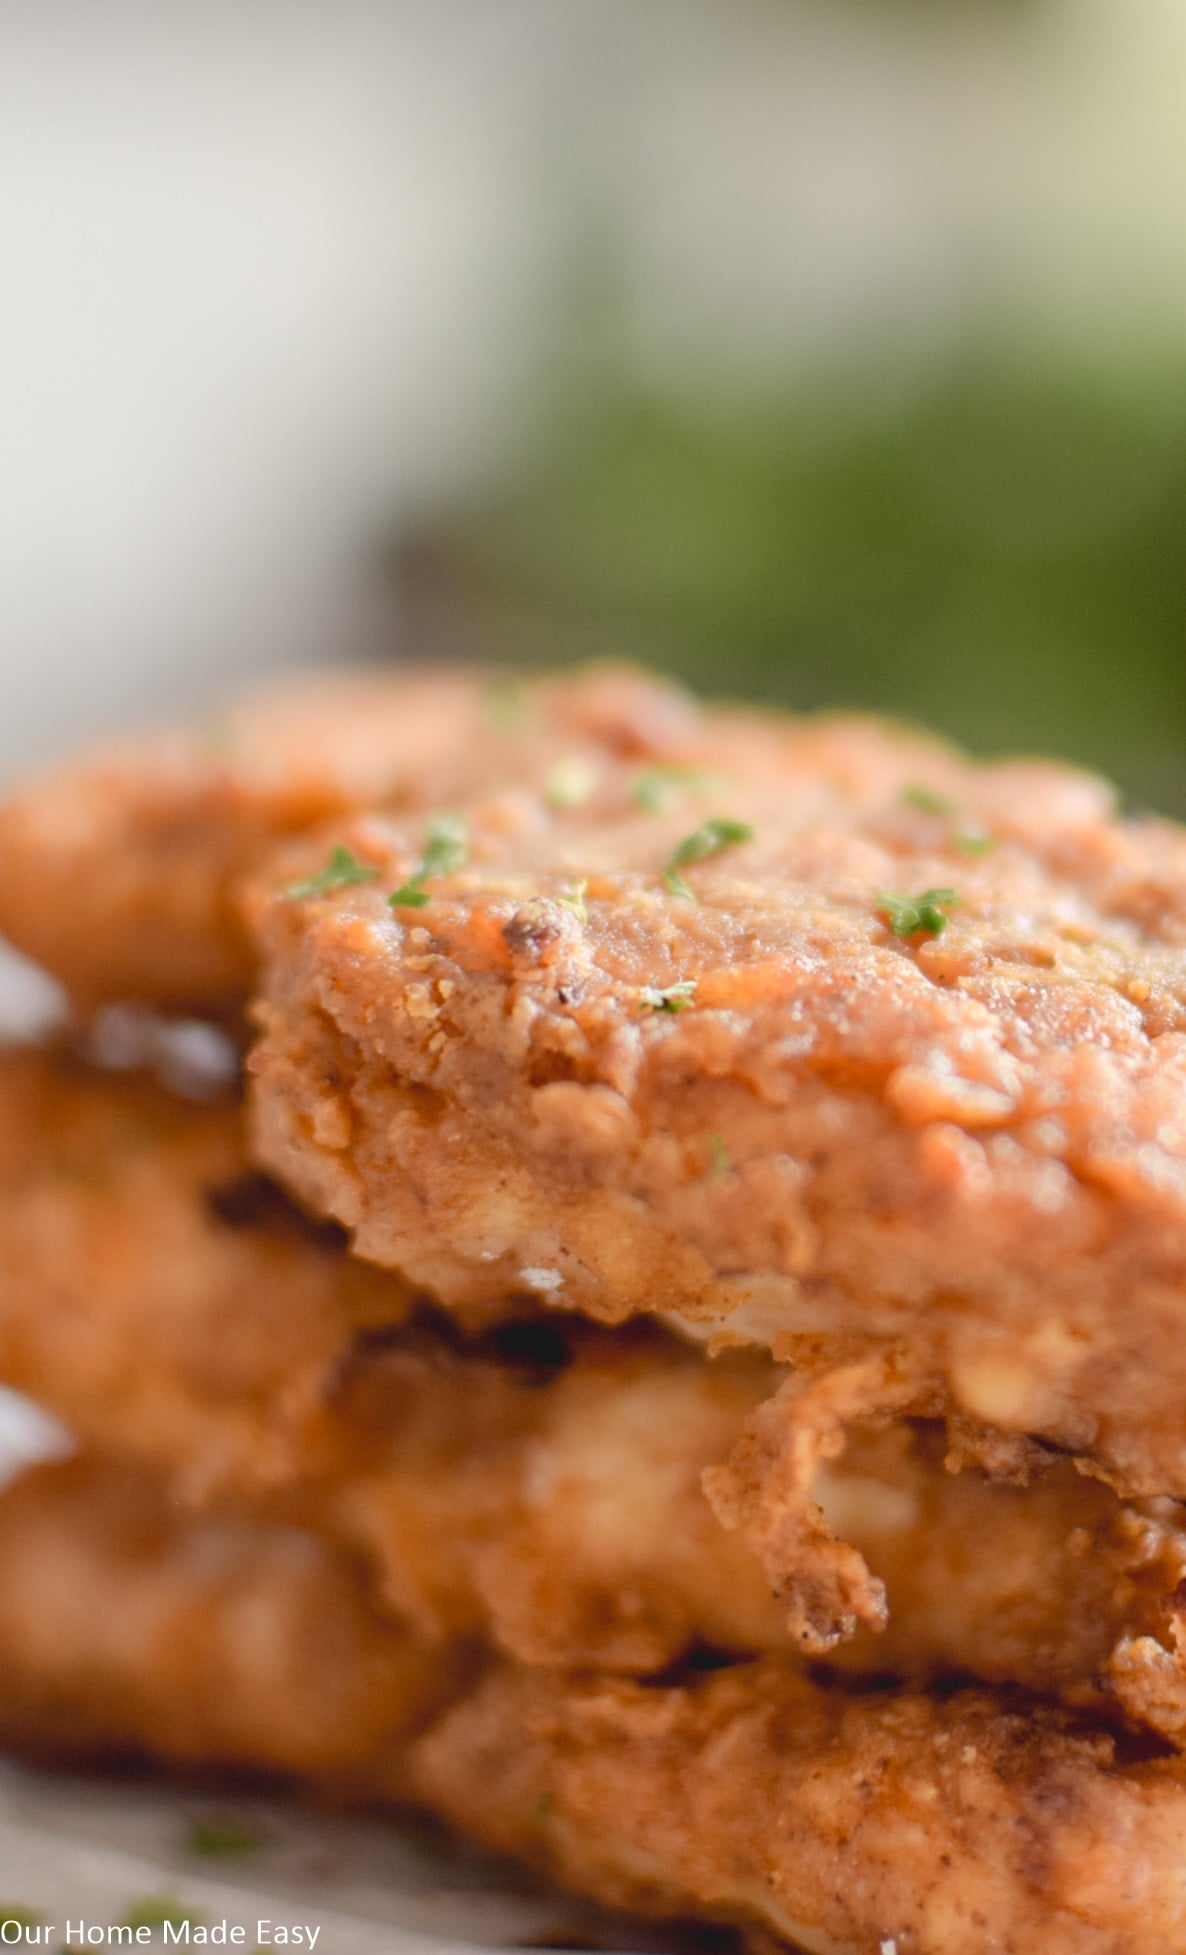 Crispy and delicious oven fried chicken is a healthy alternative to classic fried chicken